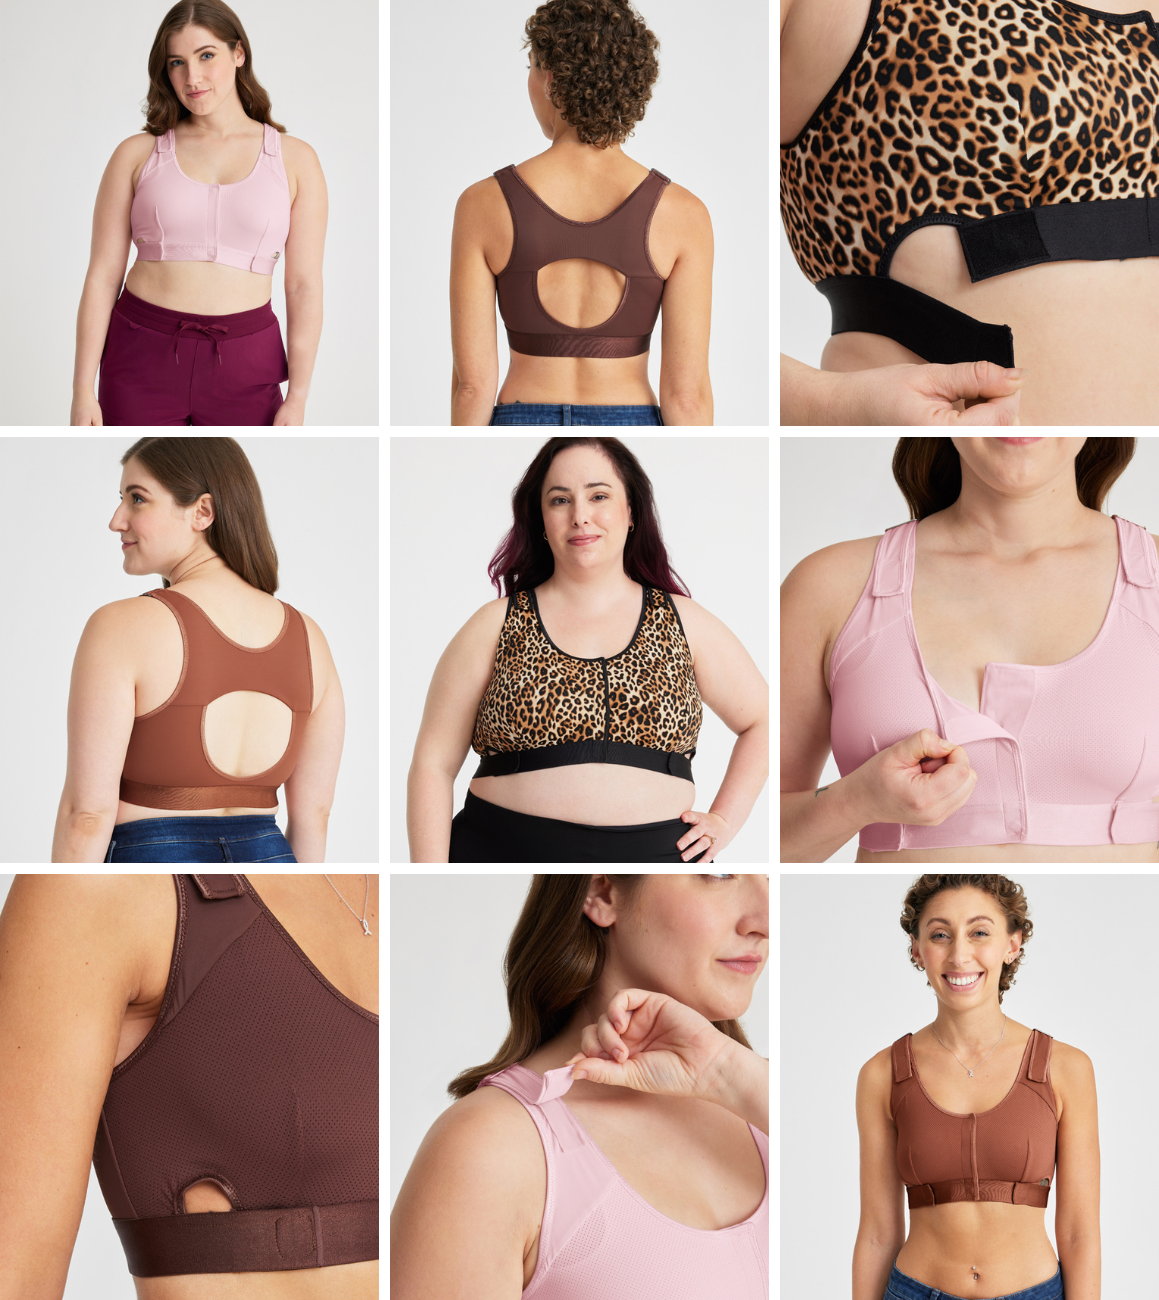 13% of women will get breast cancer. They deserve better bras.